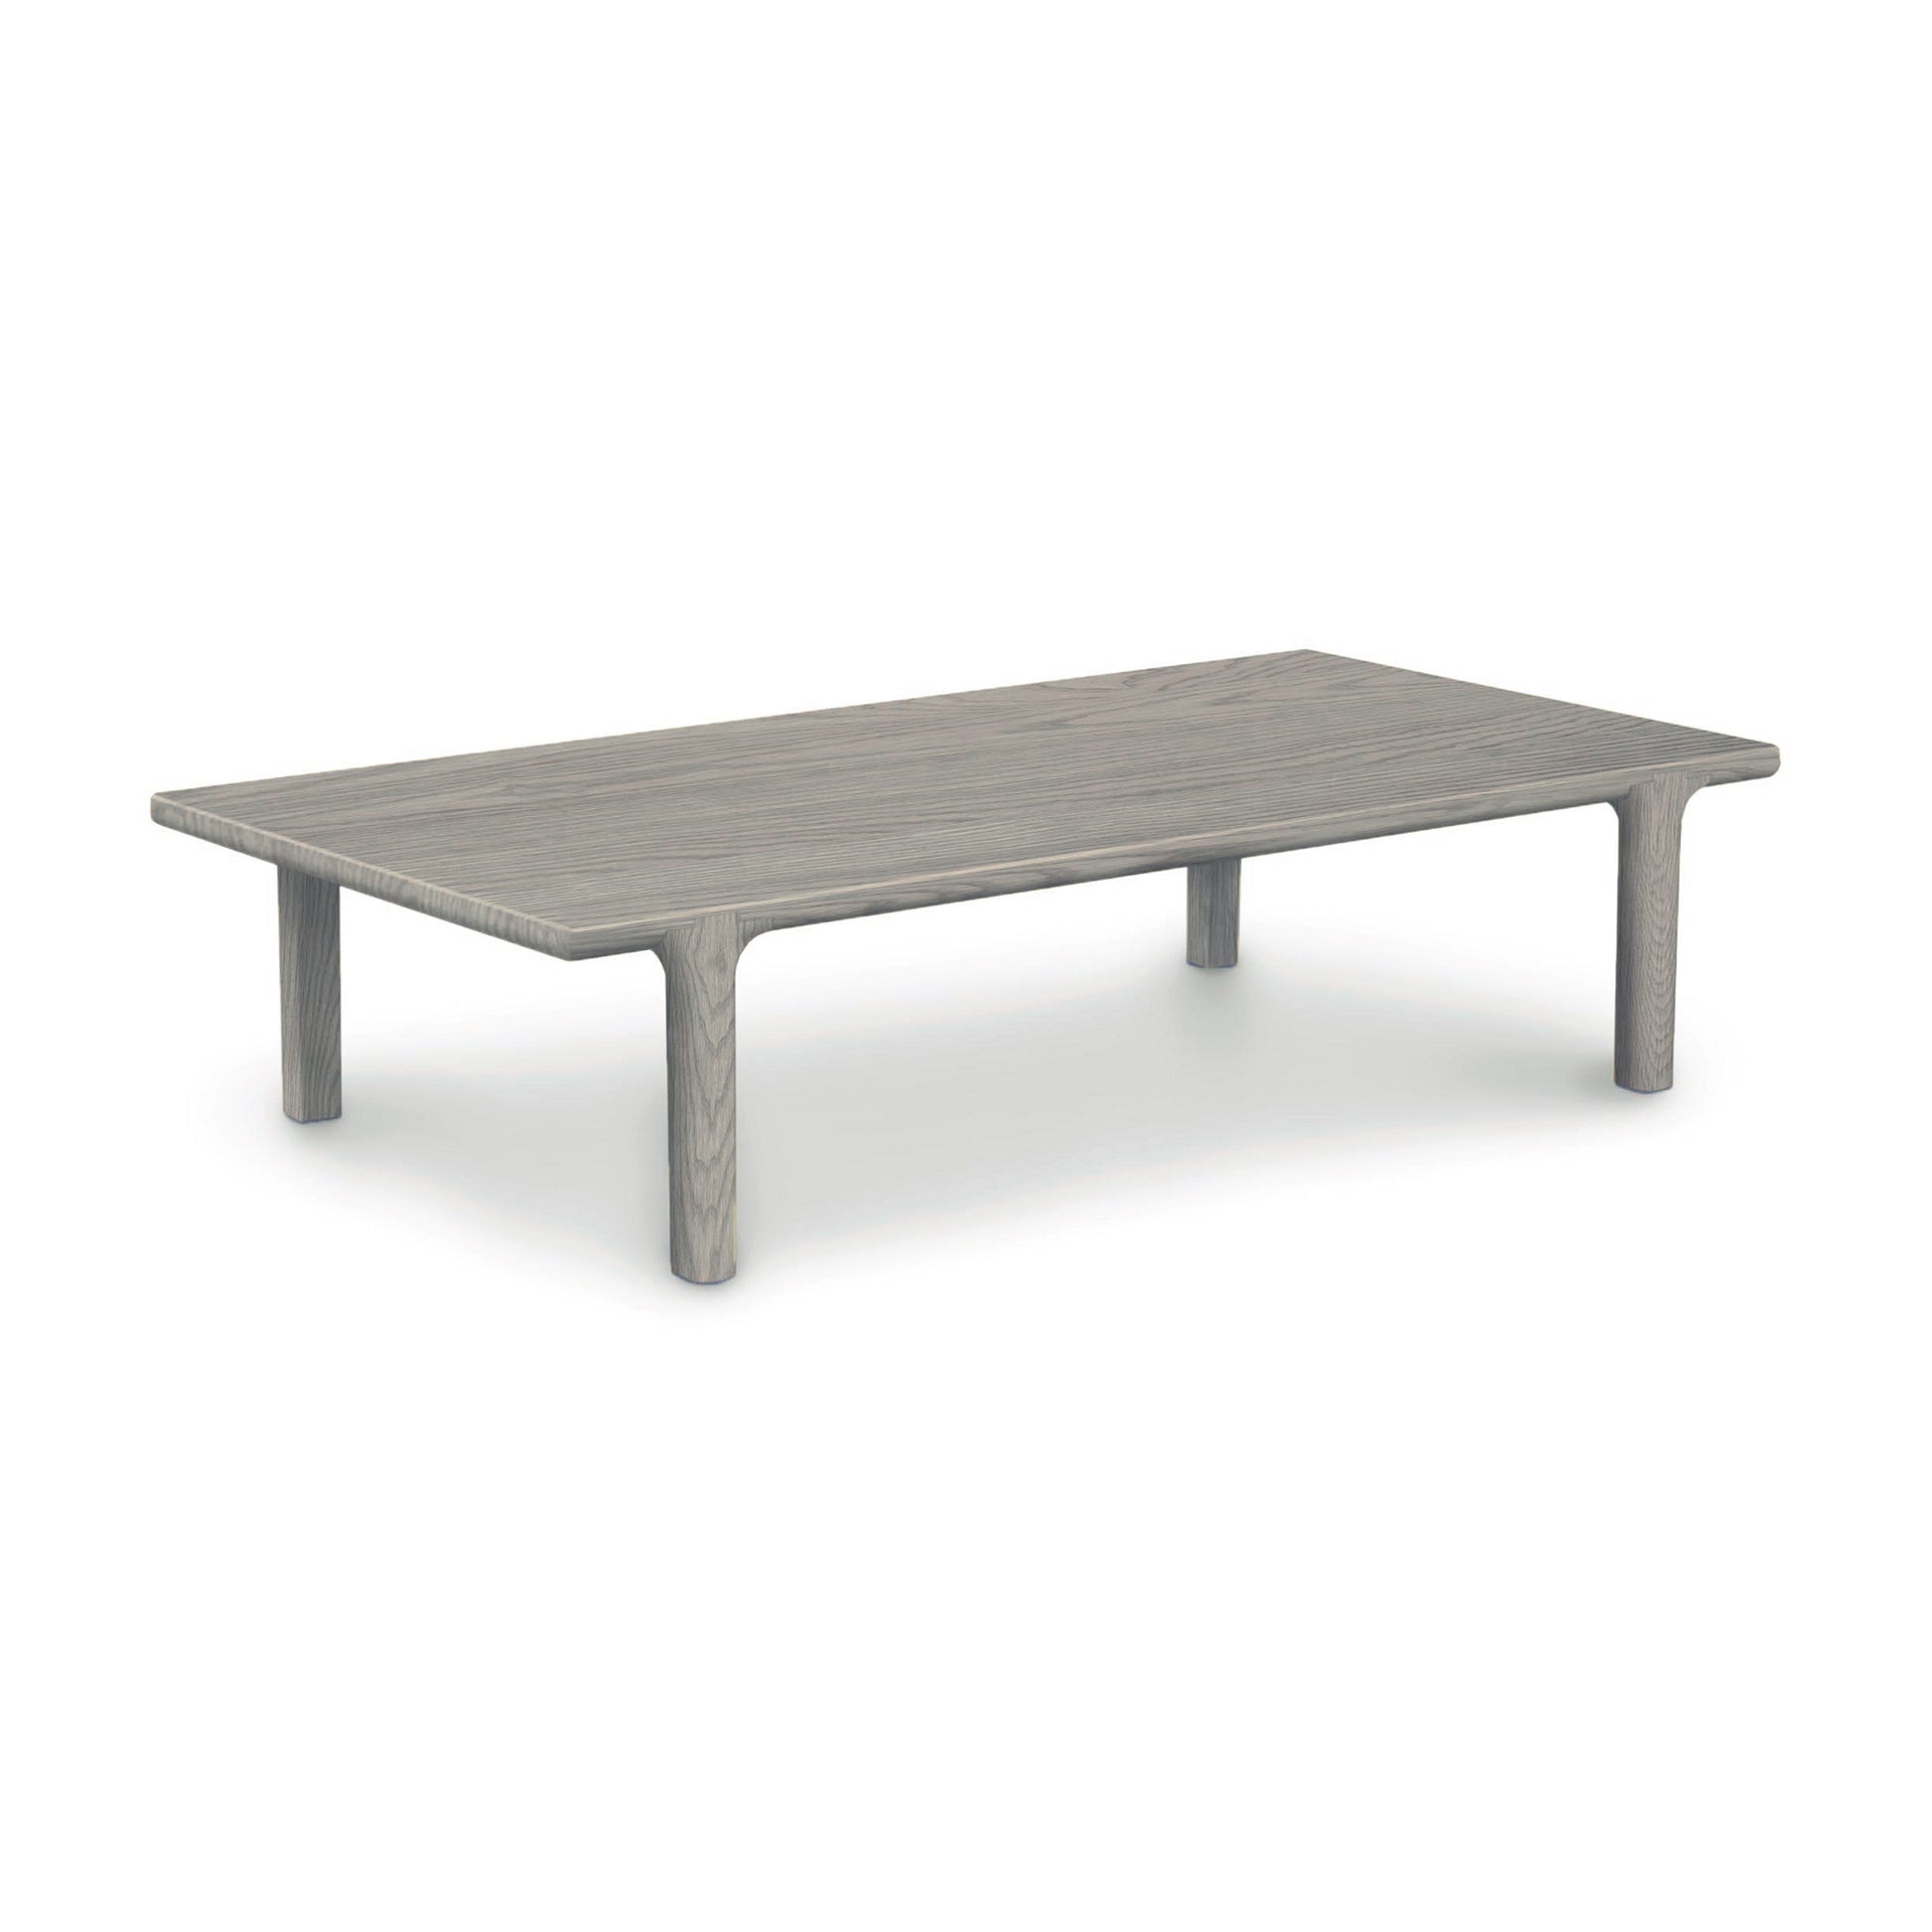 A low-profile, rectangular wooden Copeland Furniture Sierra Rectangular Coffee Table on a white background, crafted from solid North American hardwood.